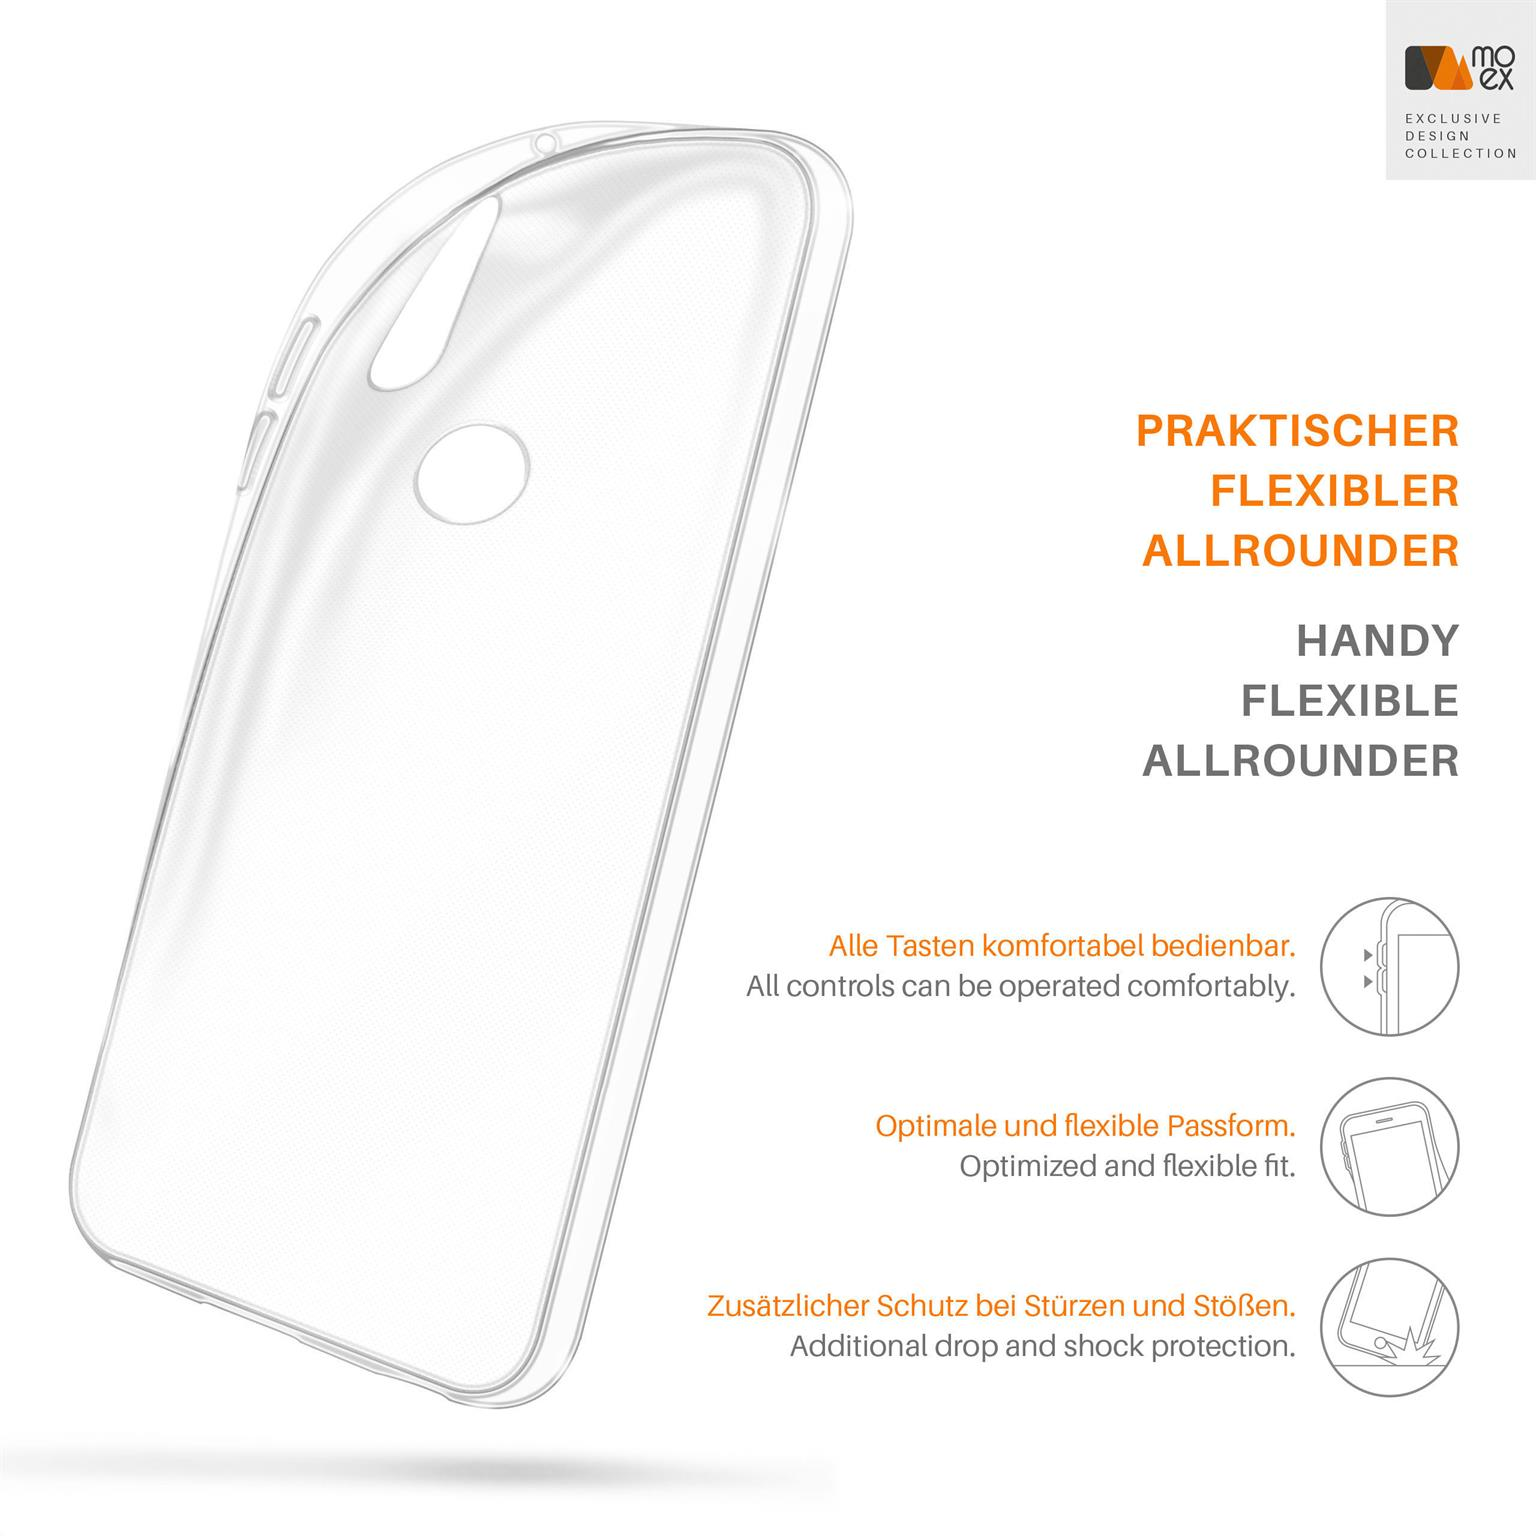 Backcover, Crystal-Clear Aero One Case, Action, MOEX Motorola,